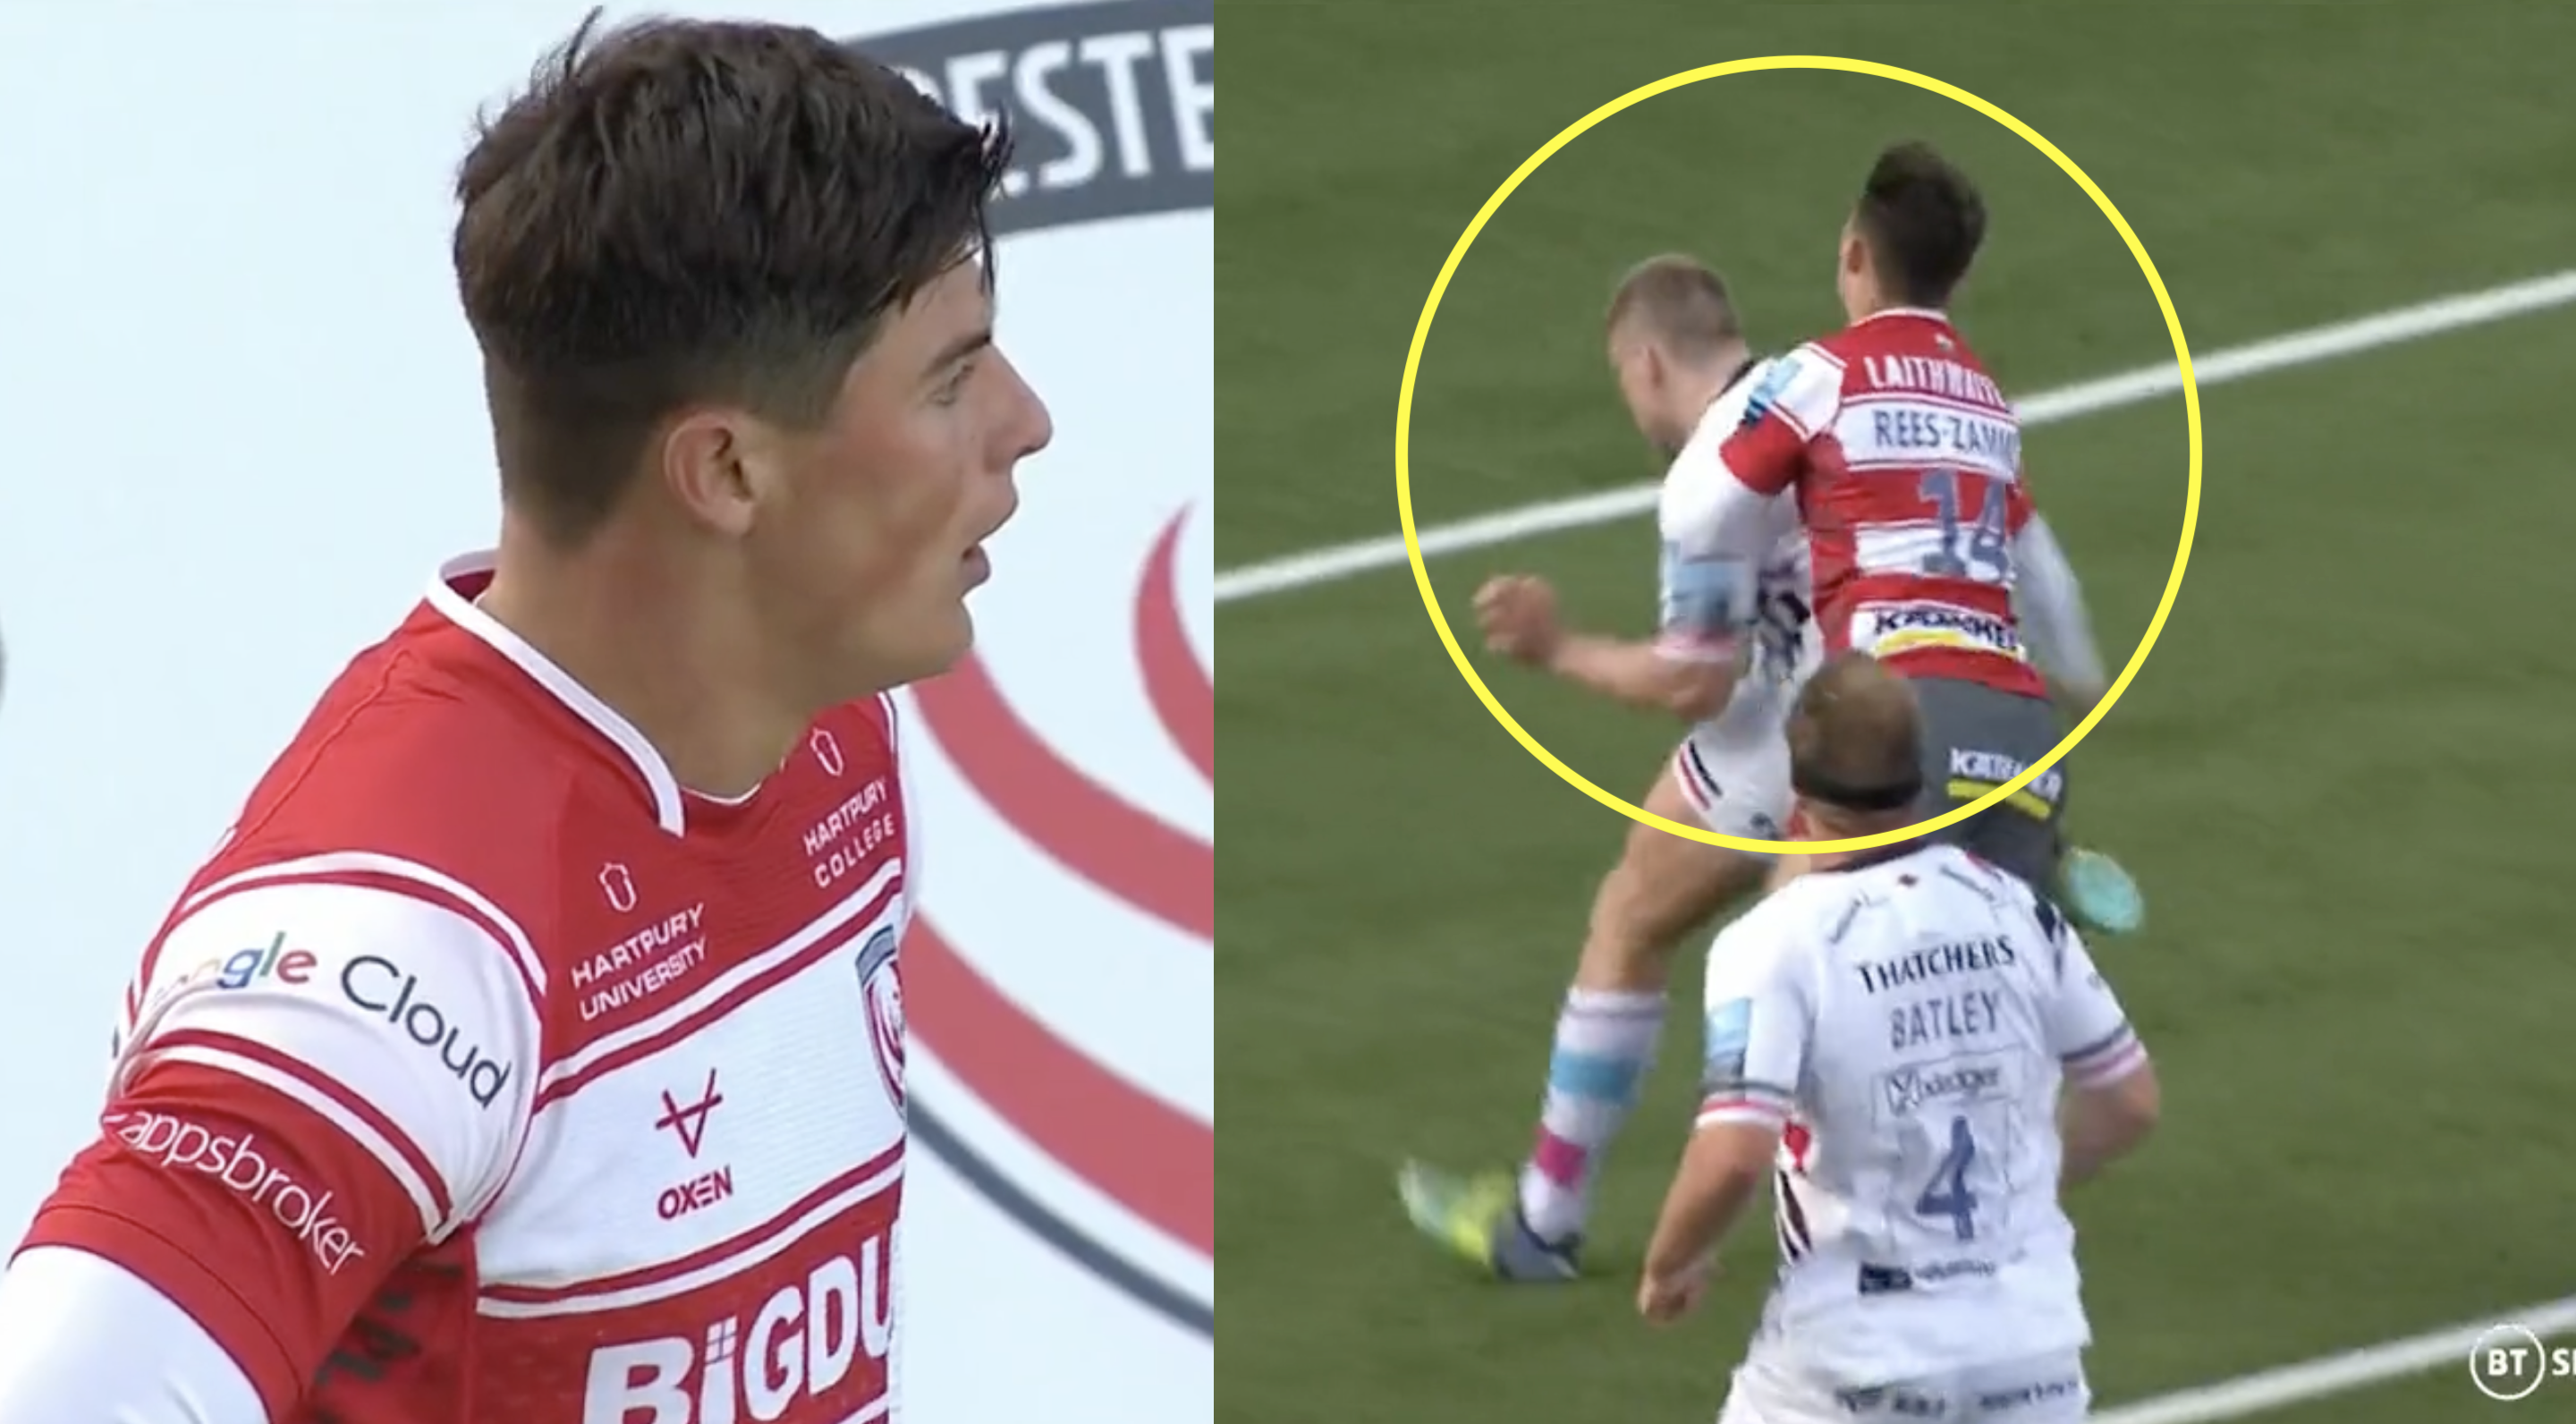 Louis Rees-Zammit produces try saver of the year but then loses all credibility